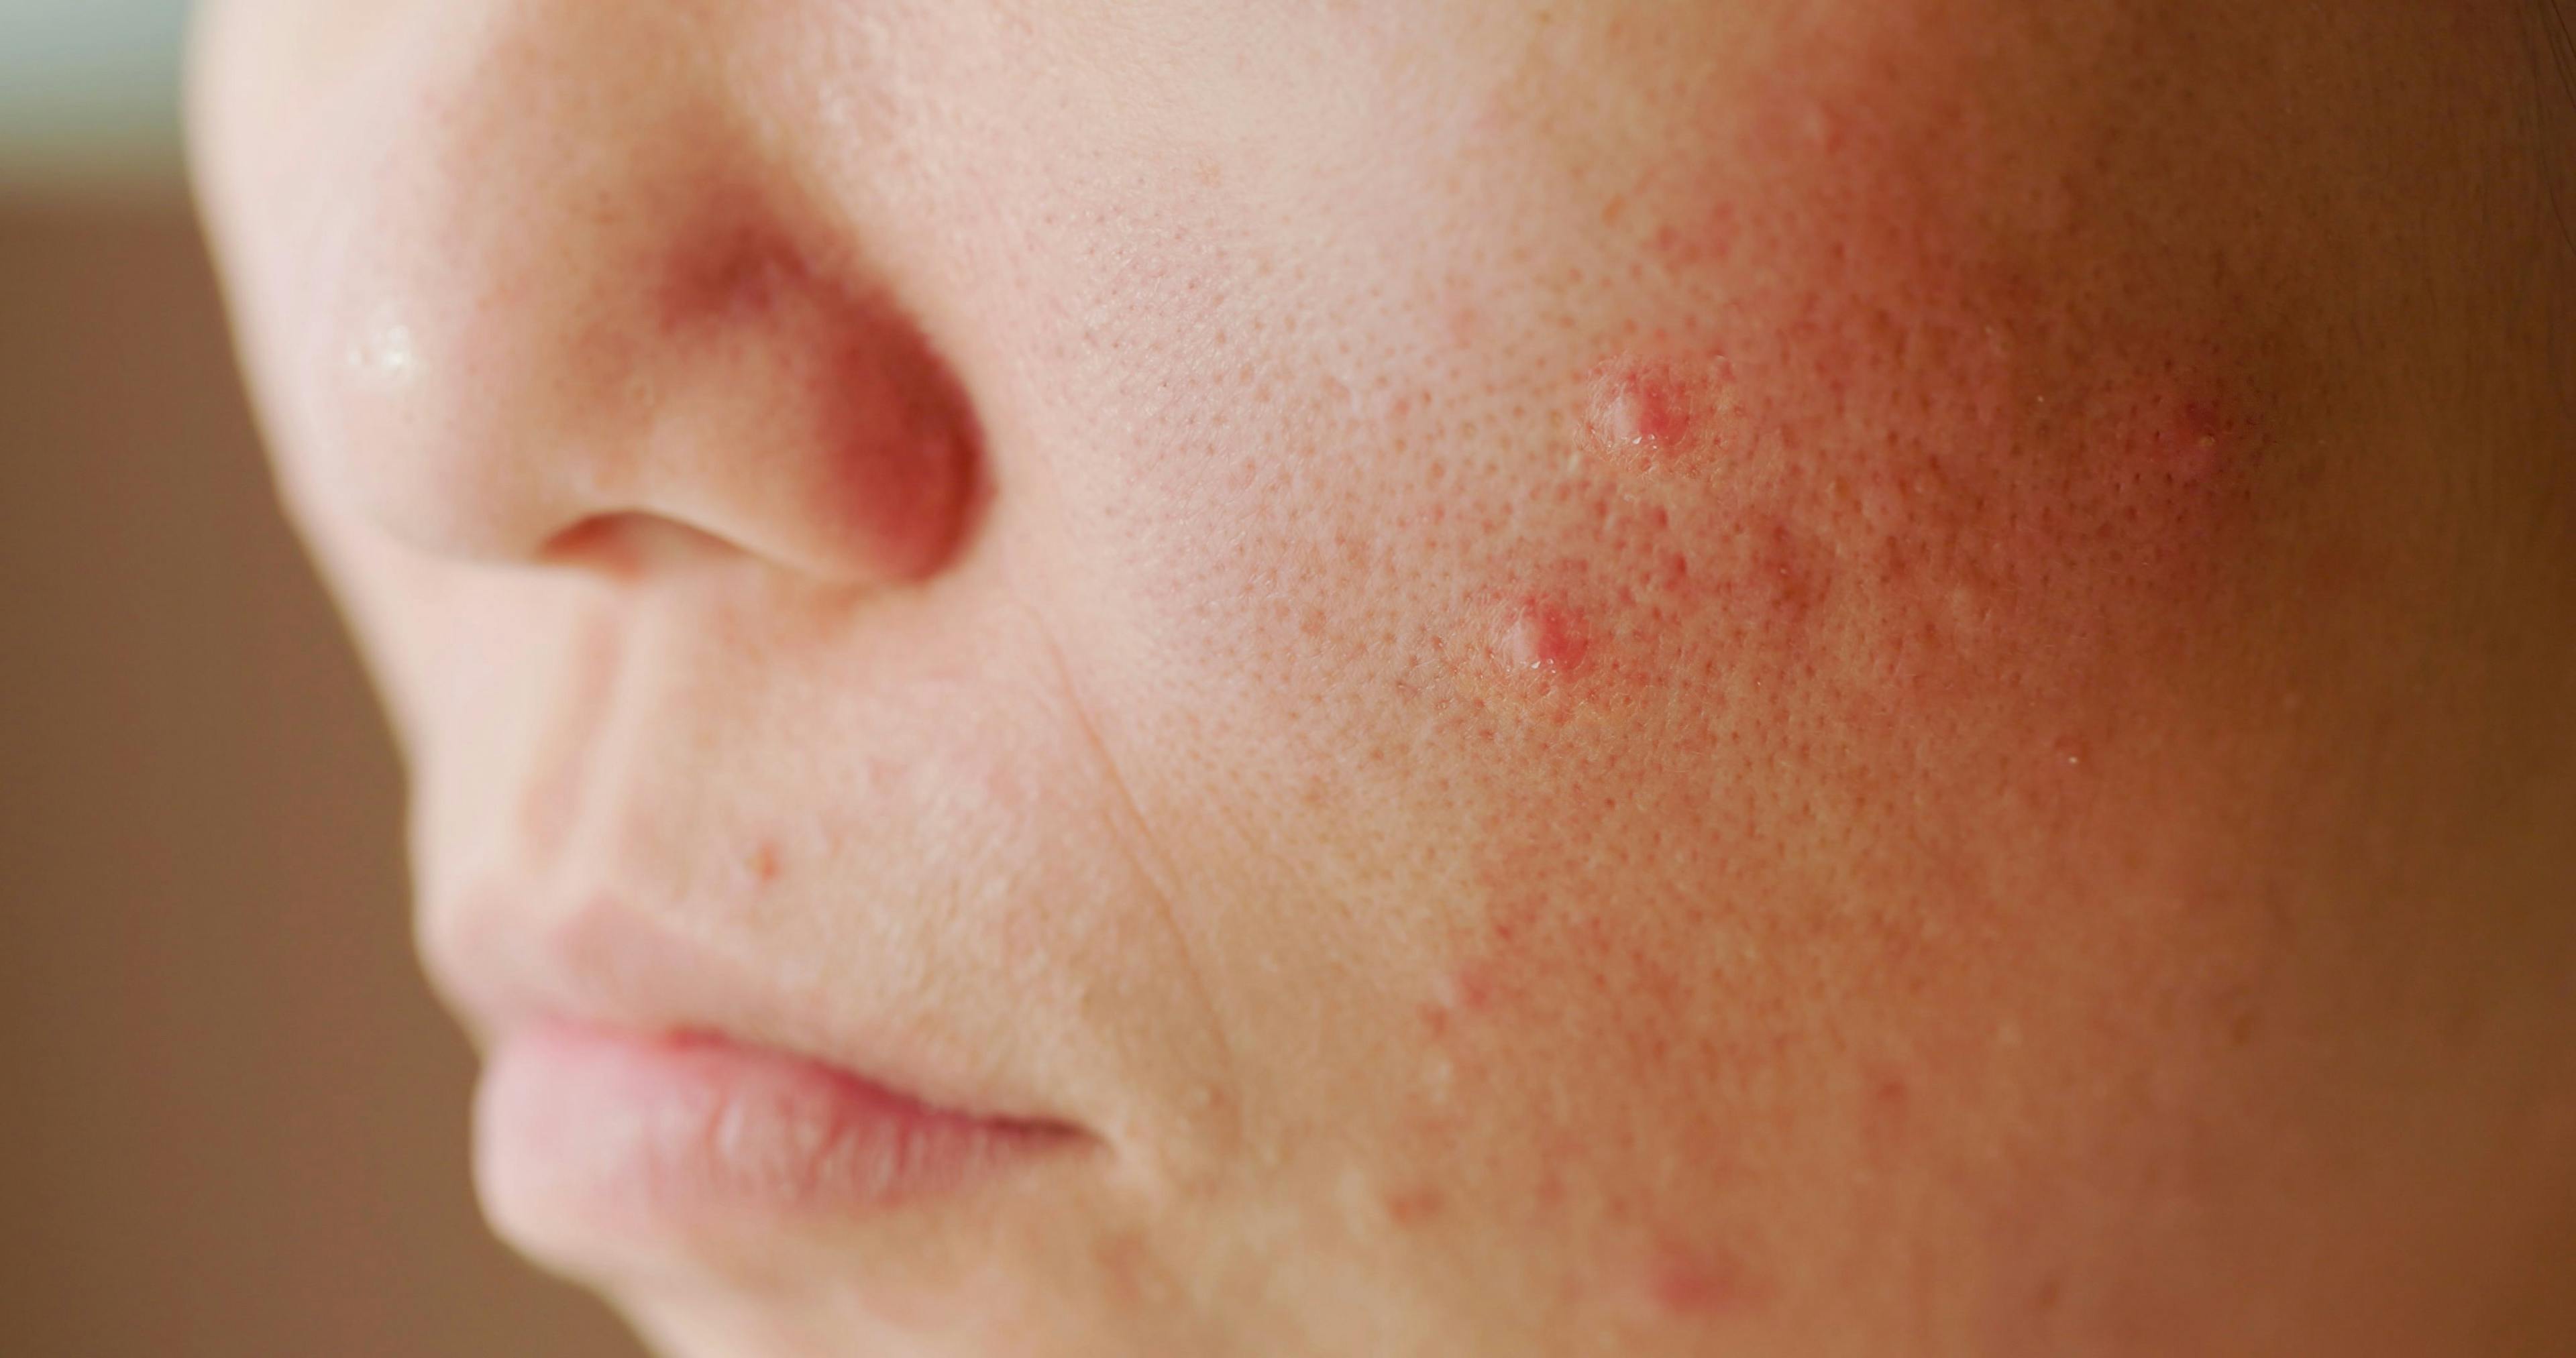 Study: Acne a Common Side Effect of Atopic Dermatitis Treatment